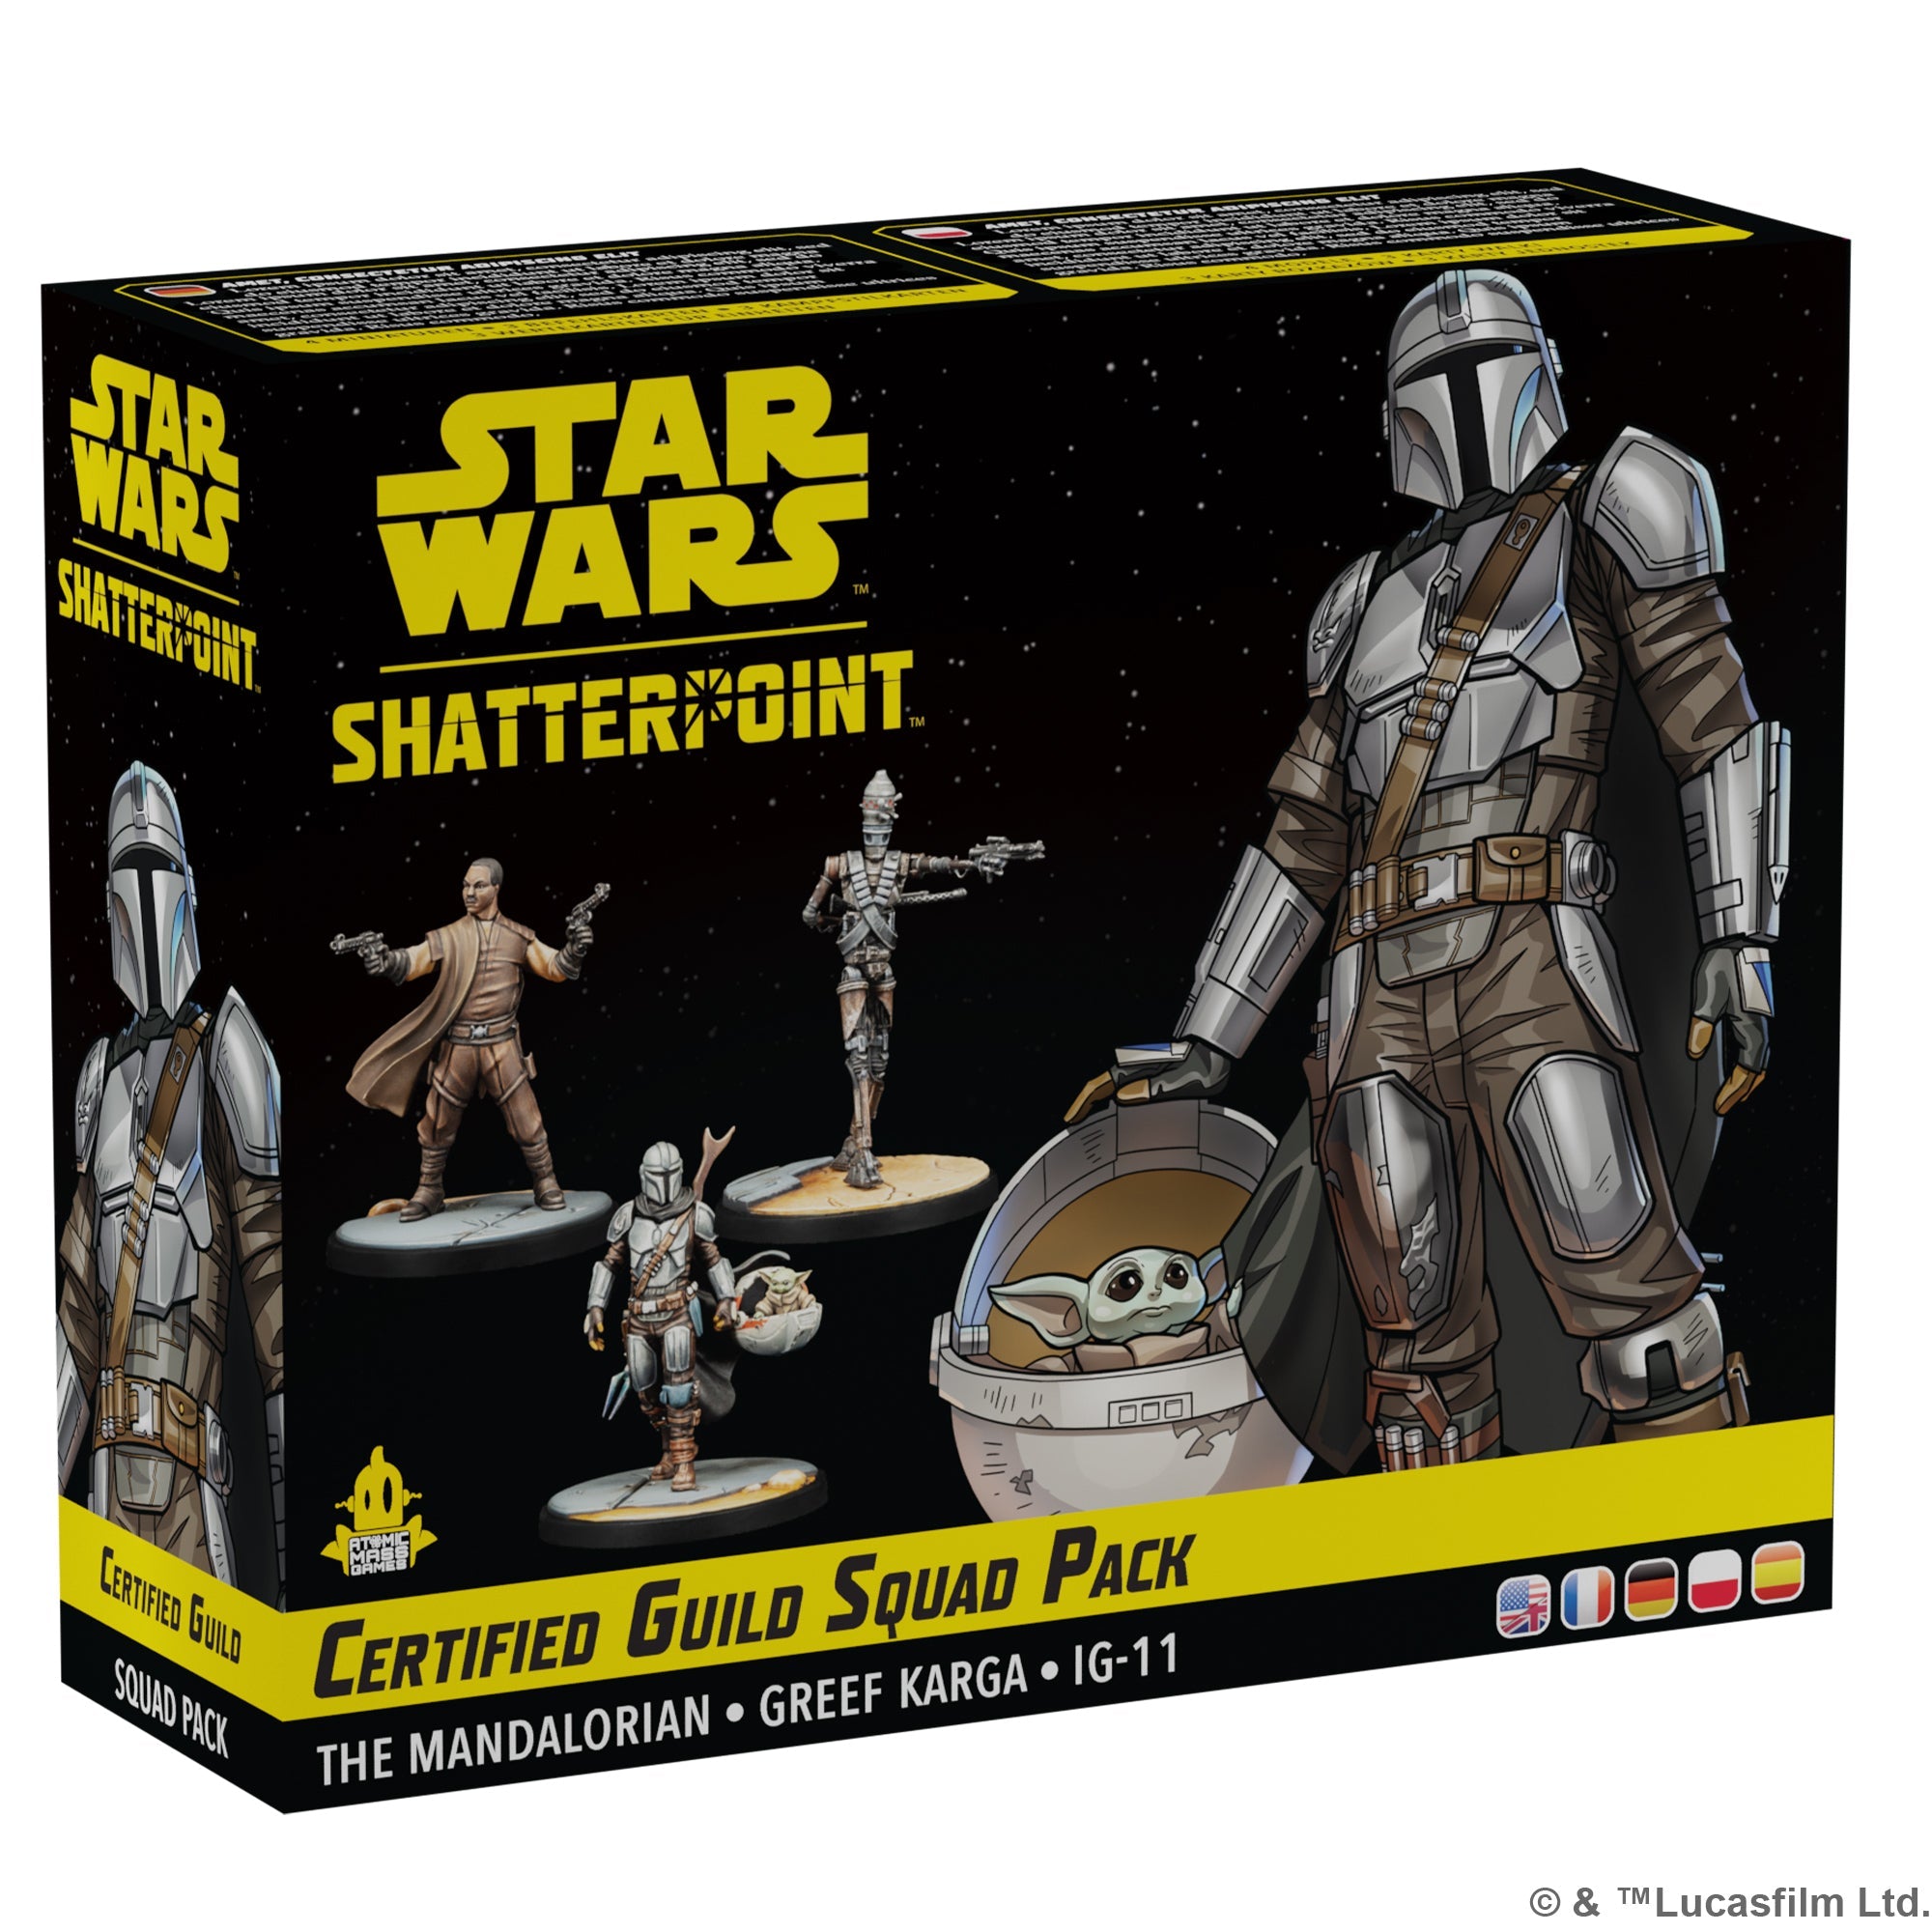 Star Wars Shatterpoint: Certified Guild, The Mandalorian Squad Pack [DELAYED to May 17]